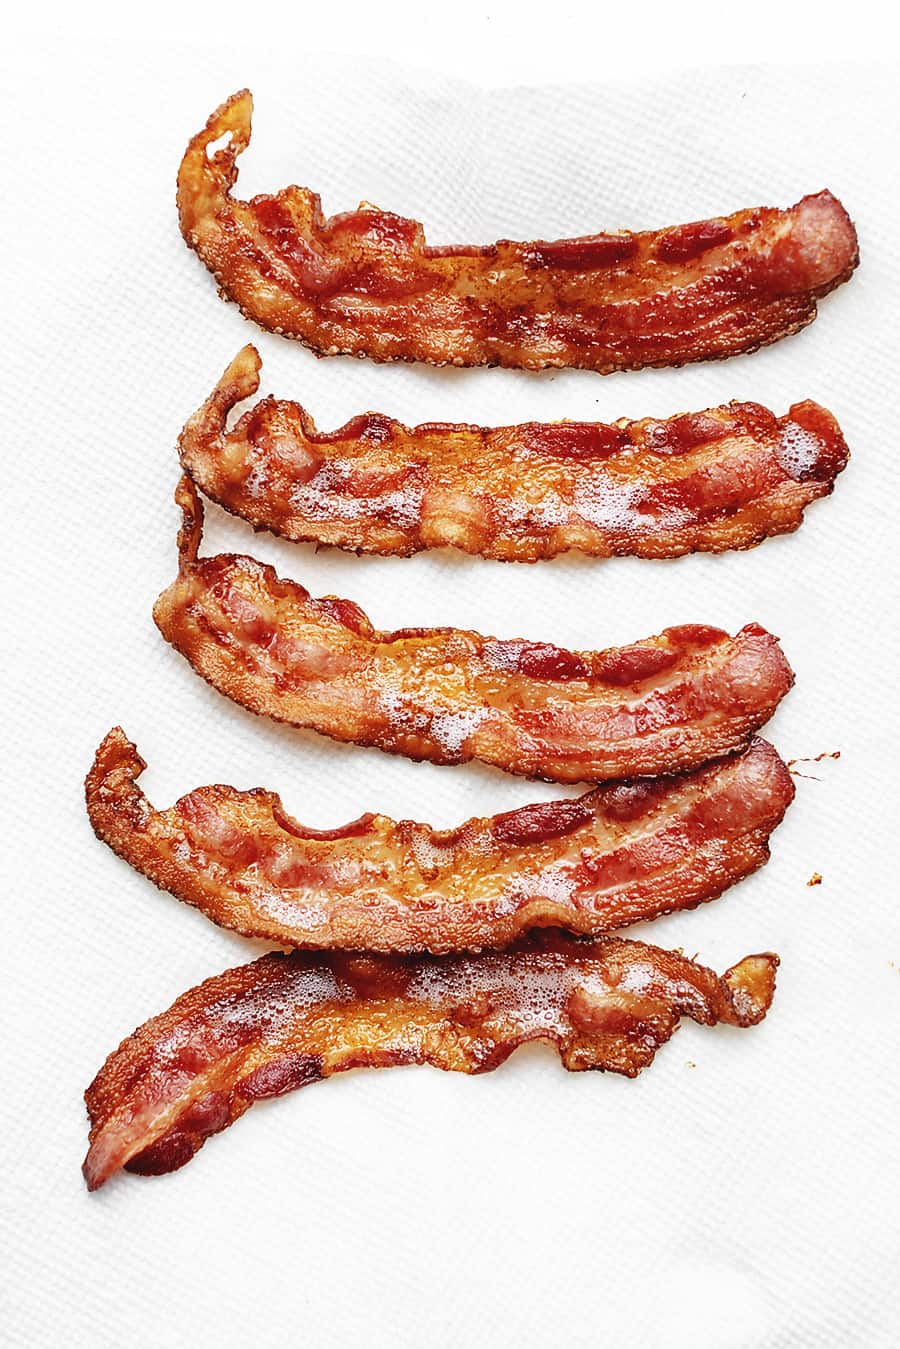 Bacon clipart cooked bacon. How to cook in